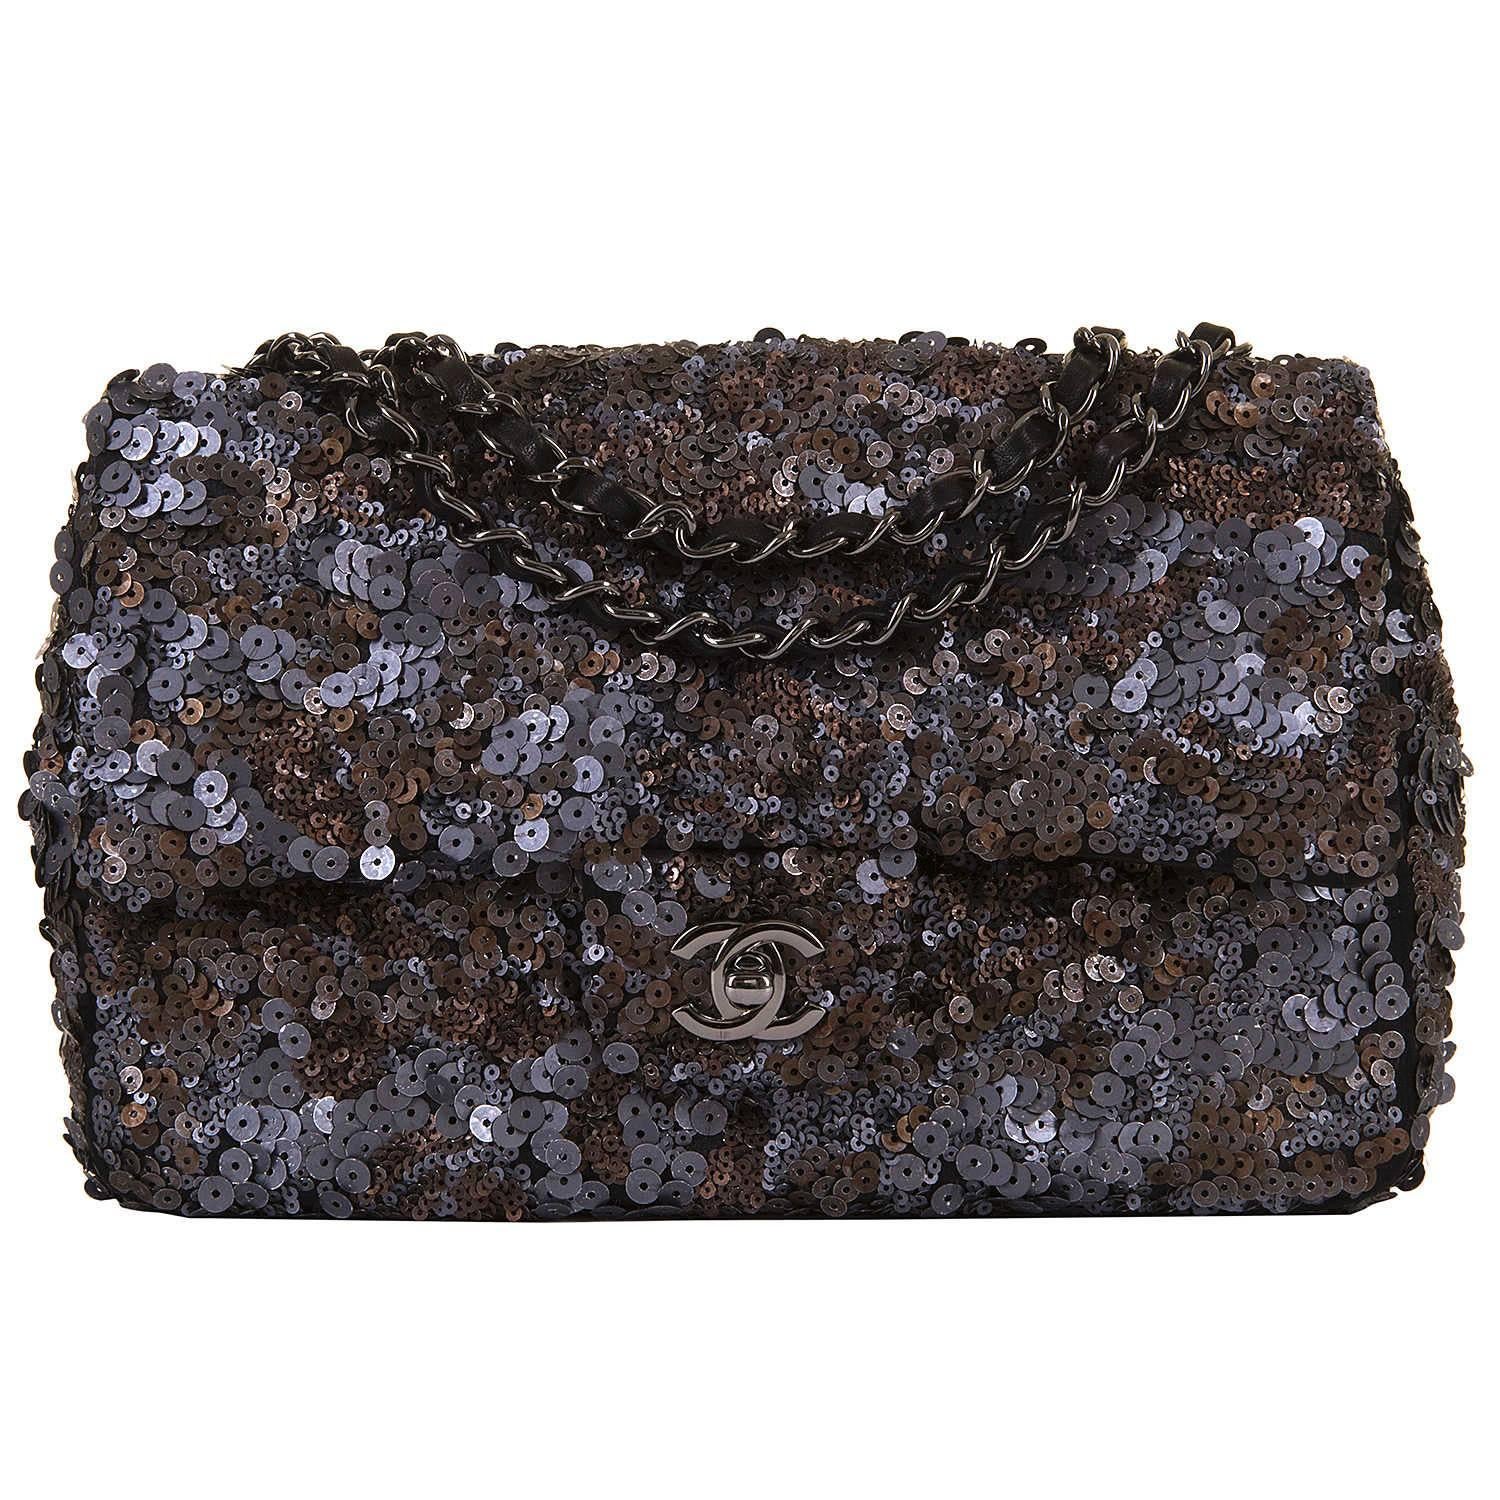 This 'Runway' Bag by Chanel, is just exceptional. In Store-Fresh condition this UNIQUE medium flap bag has been hand-embroidered with muli-coloured grey/brown/silver/black sequins with grey/ silver tone Hardware to match, on a Black Lambskin base